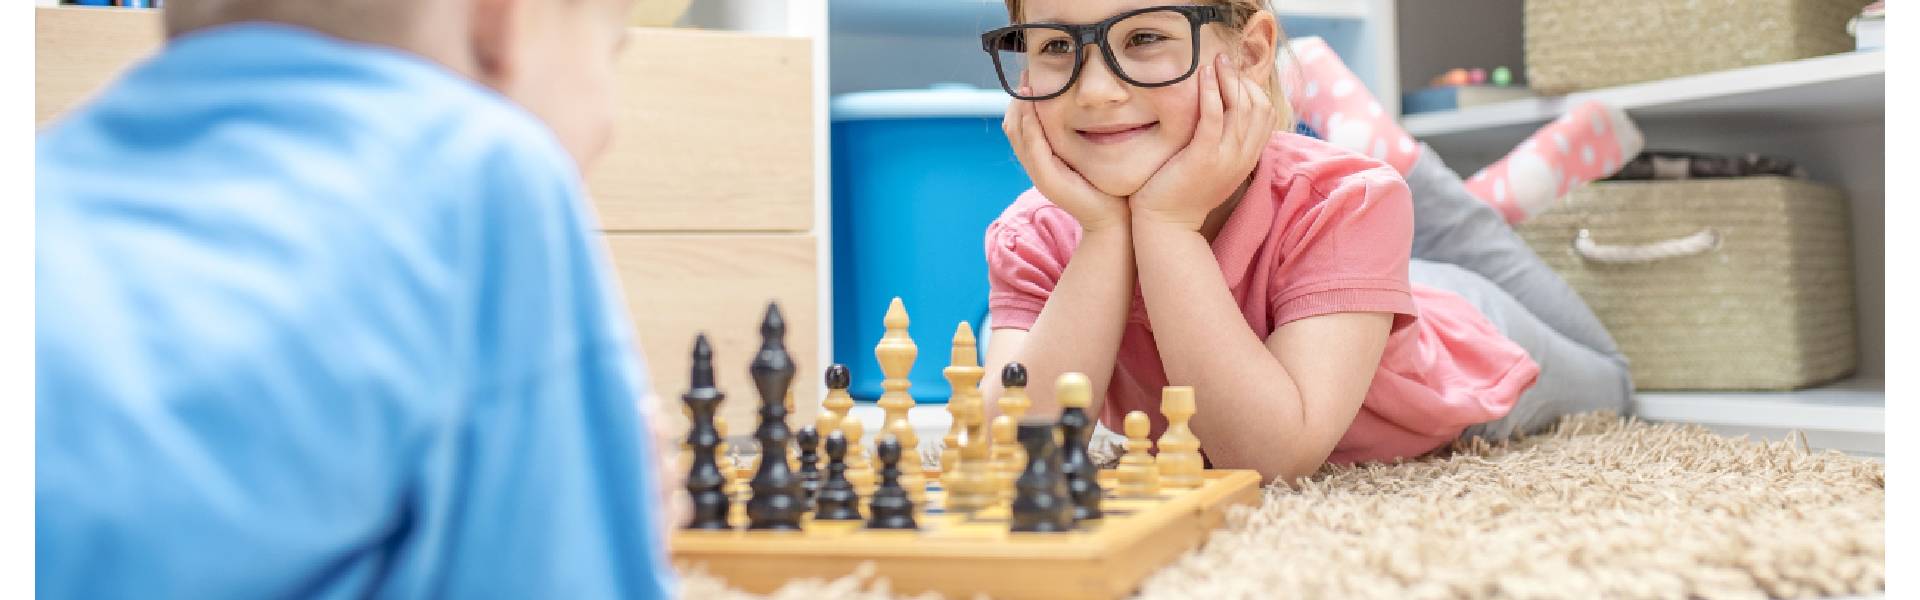 a-little-girl-and-a-boy-playing-with-games-and-puzzles-including-chess